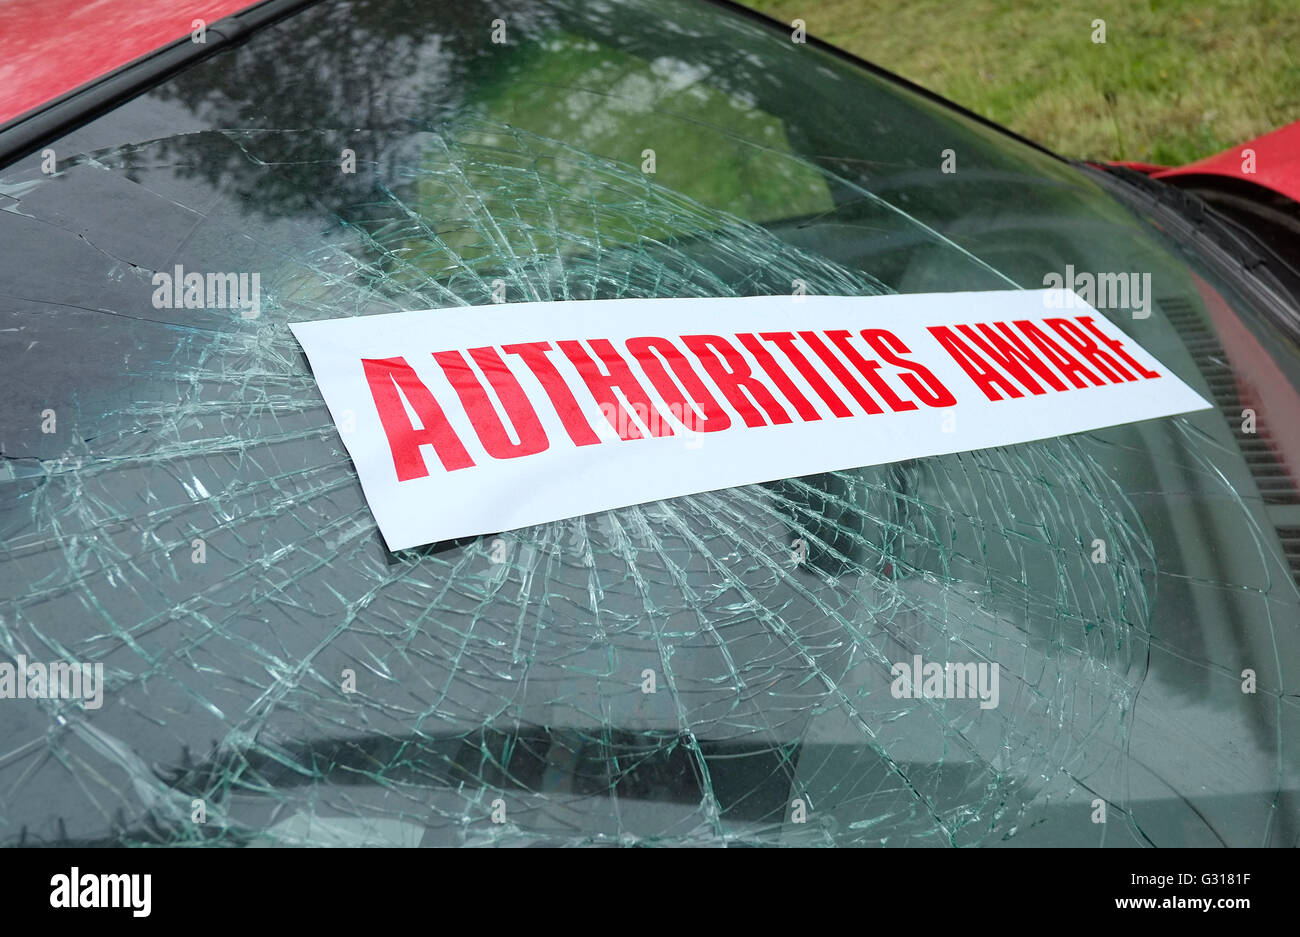 authorities aware sticker on windscreen of crashed car Stock Photo